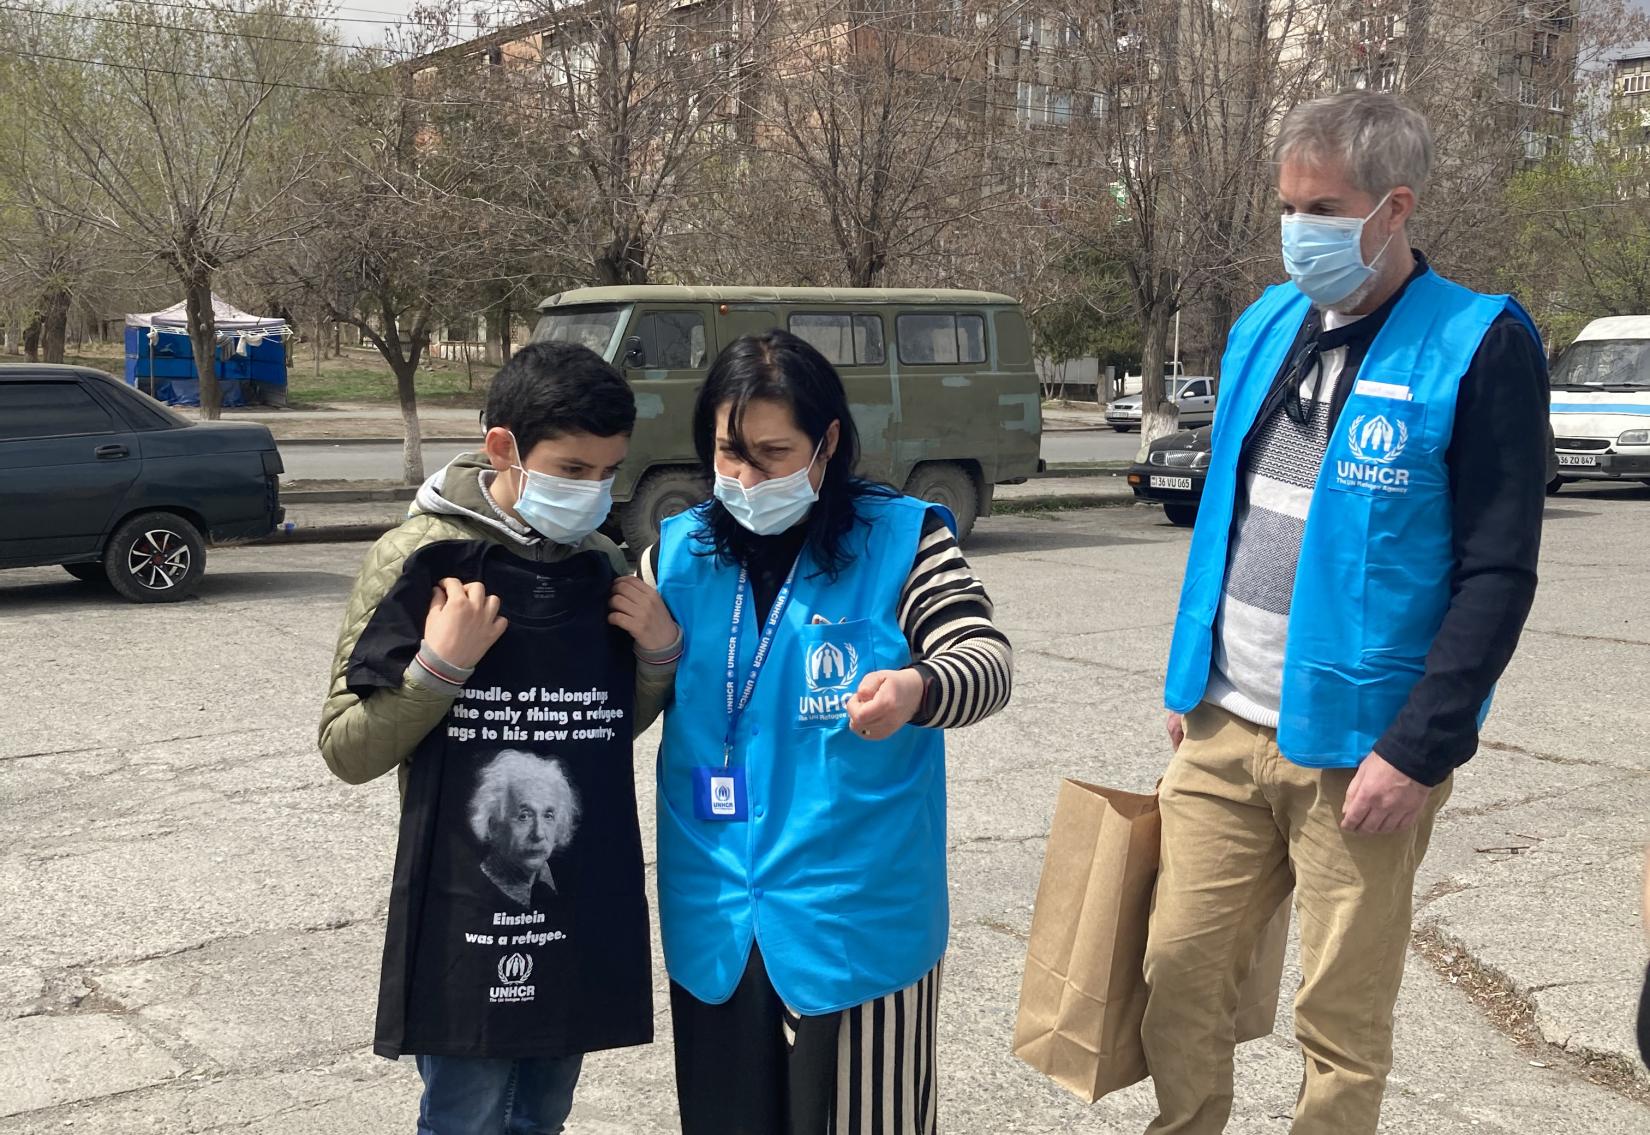 UNHCR staff members give a UNHCR T-shirt to a young boy